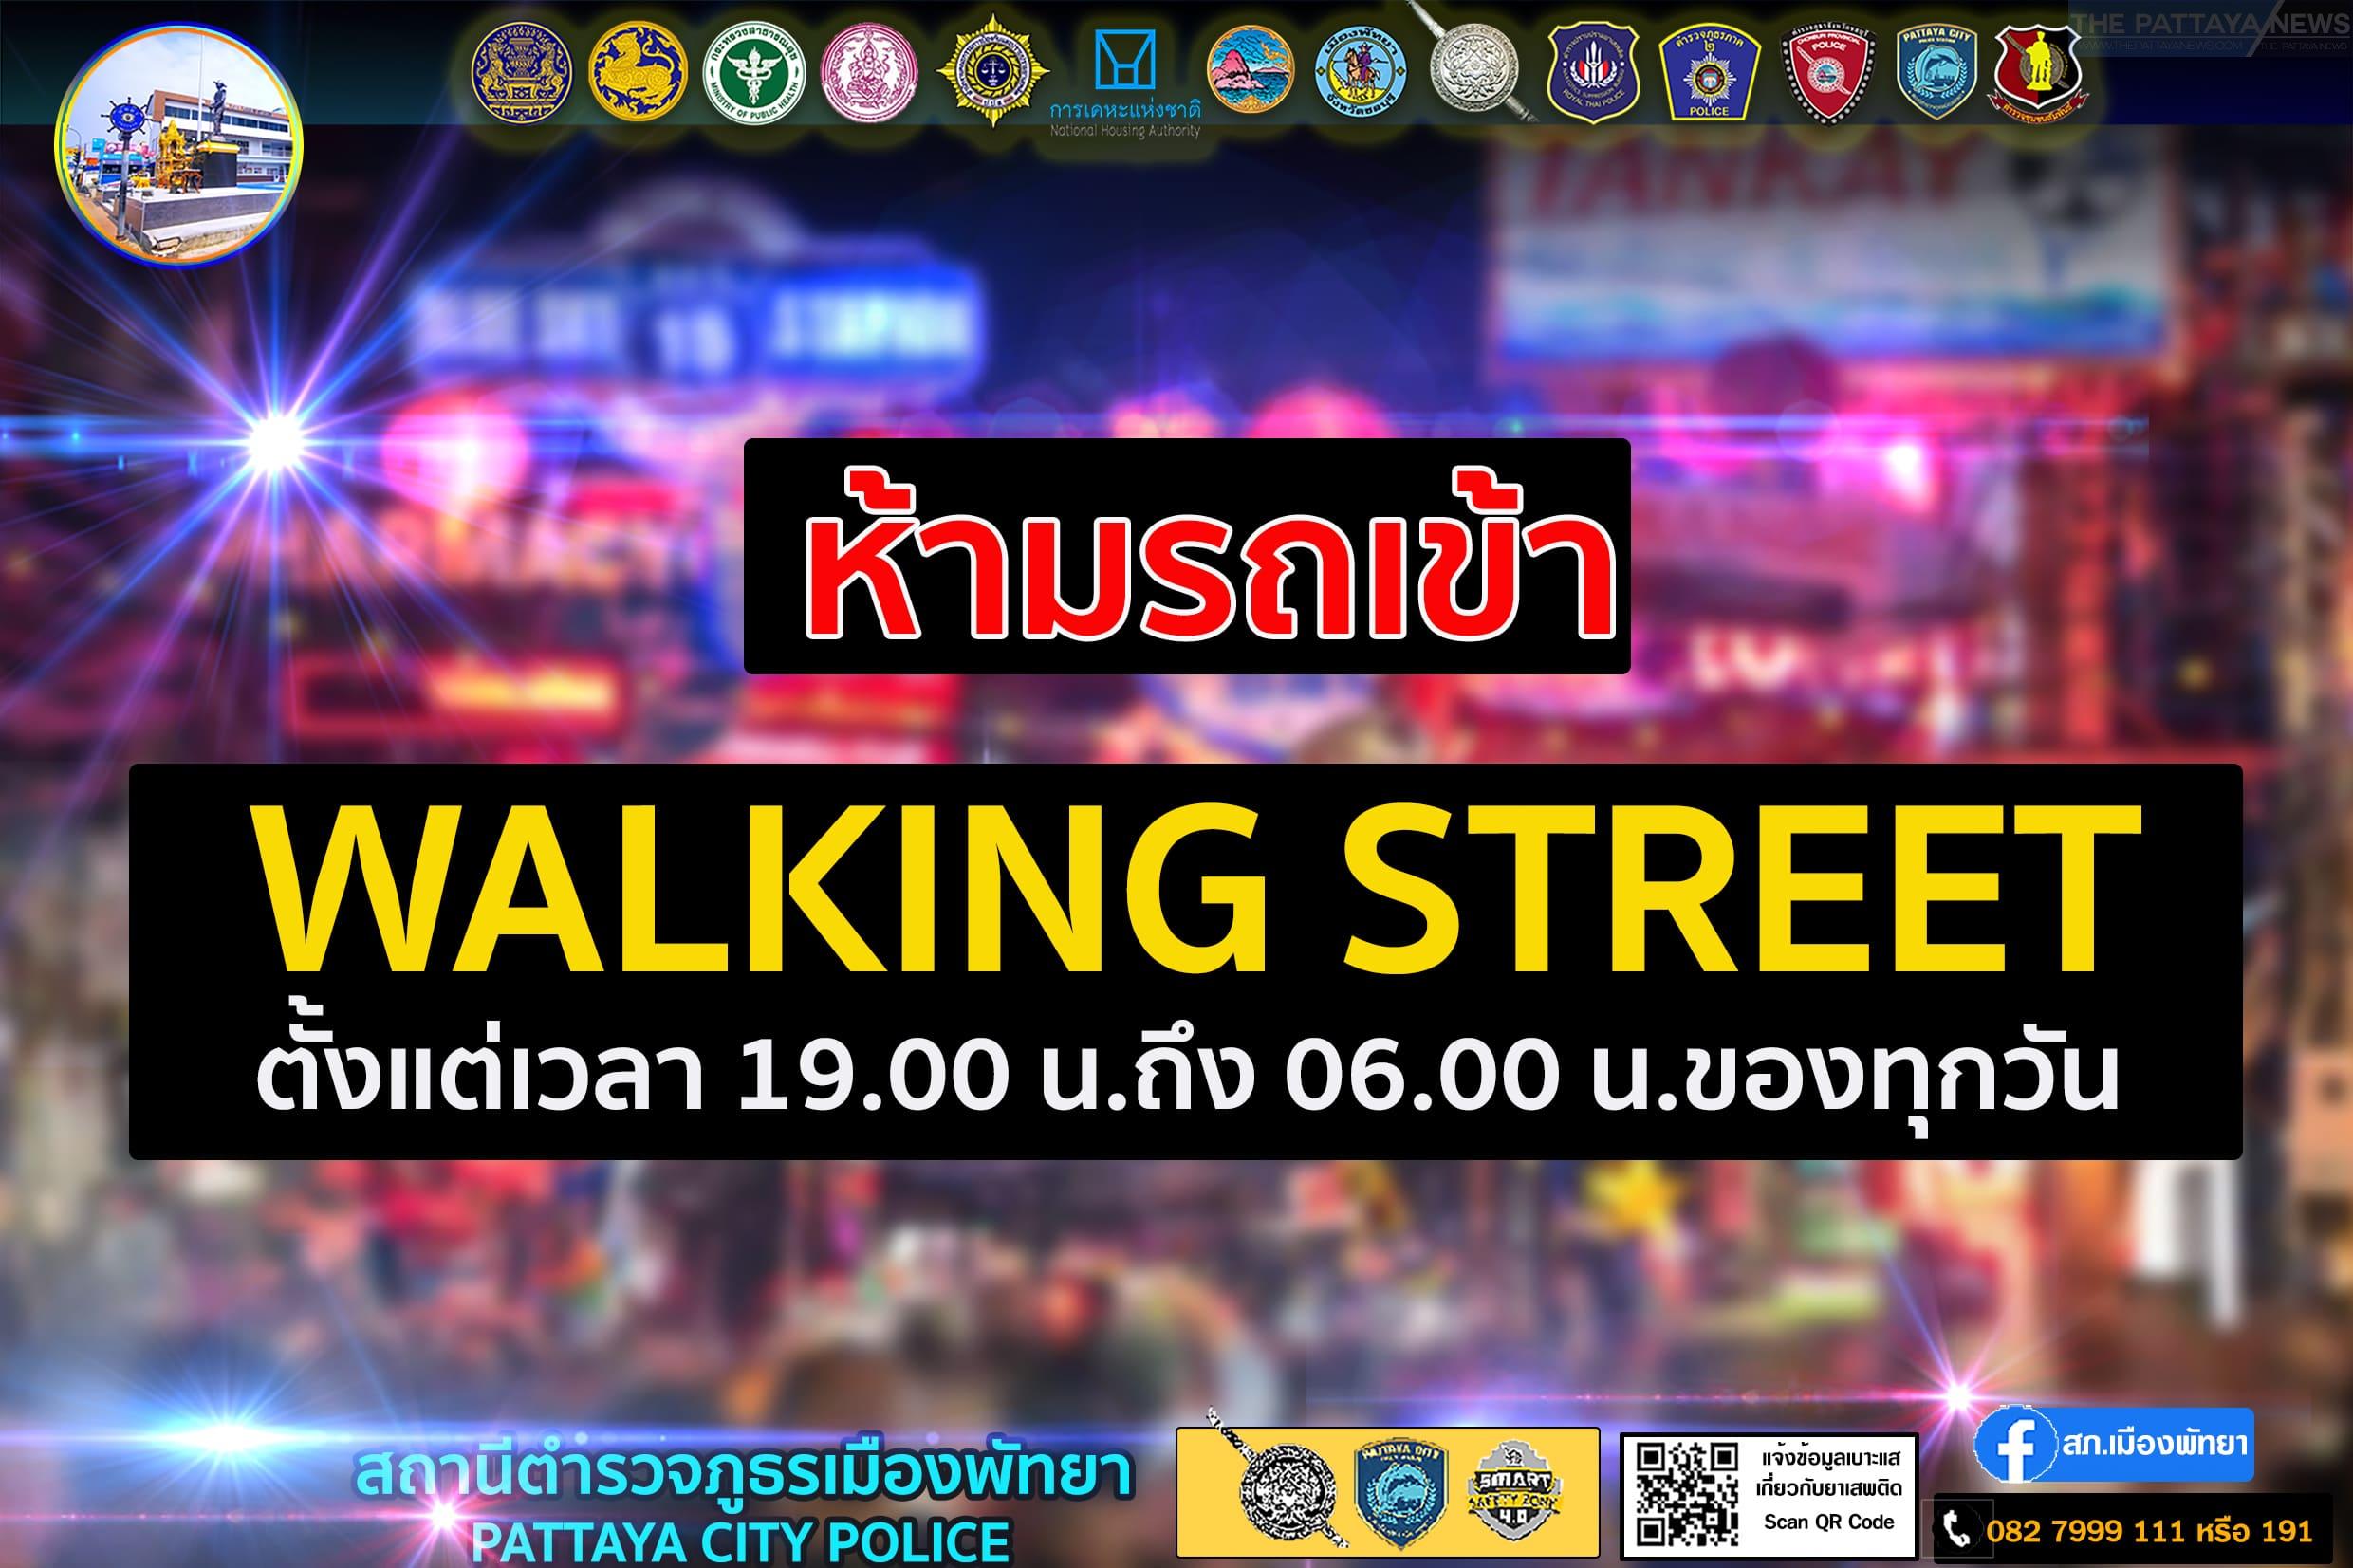 Walking Street to close to vehicle traffic overnight again as visitors increase